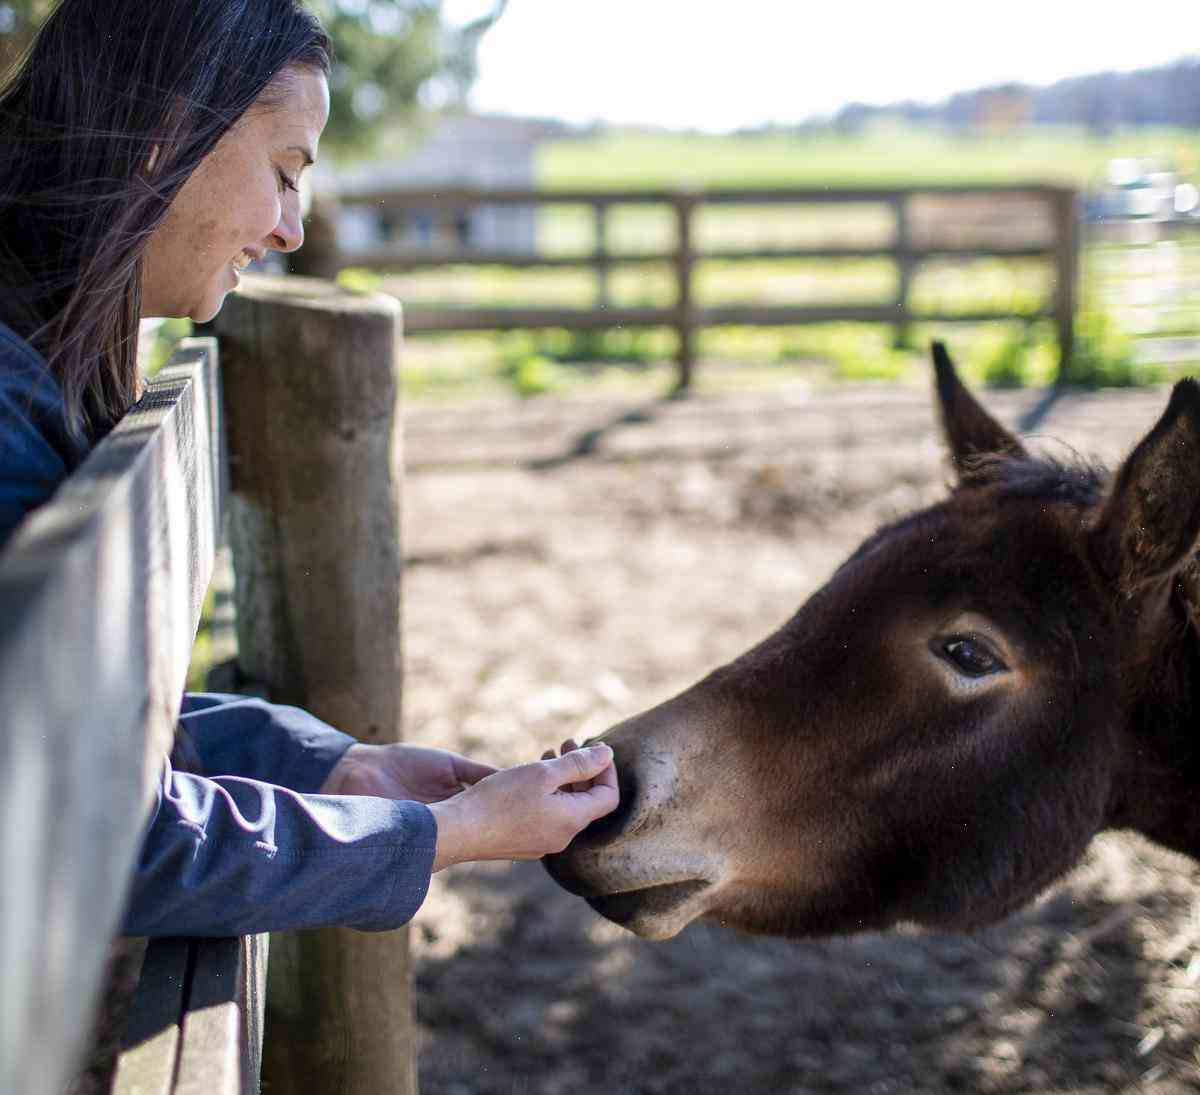 The Donkey Sanctuary of Canada: The story behind Canada's oldest fundraiser